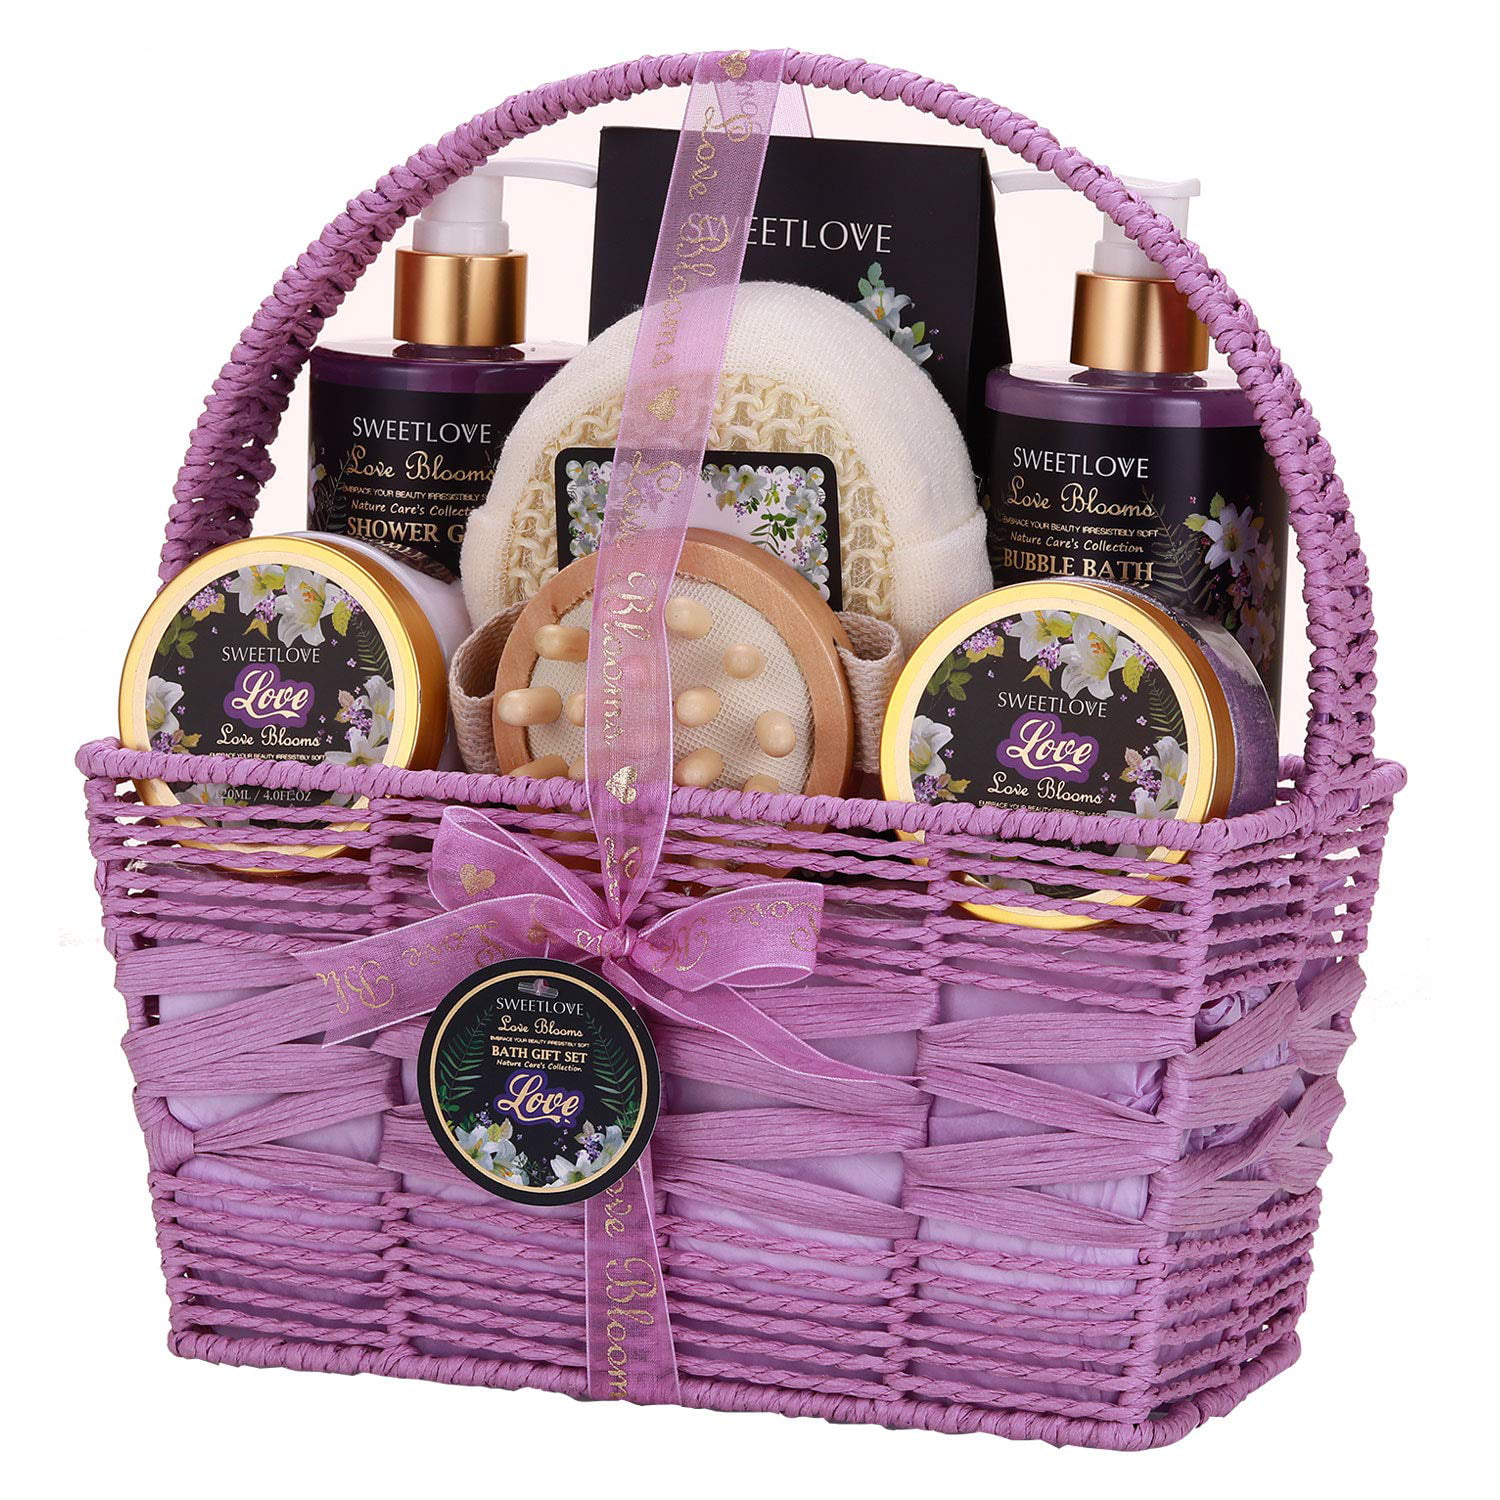 best holiday gift baskets